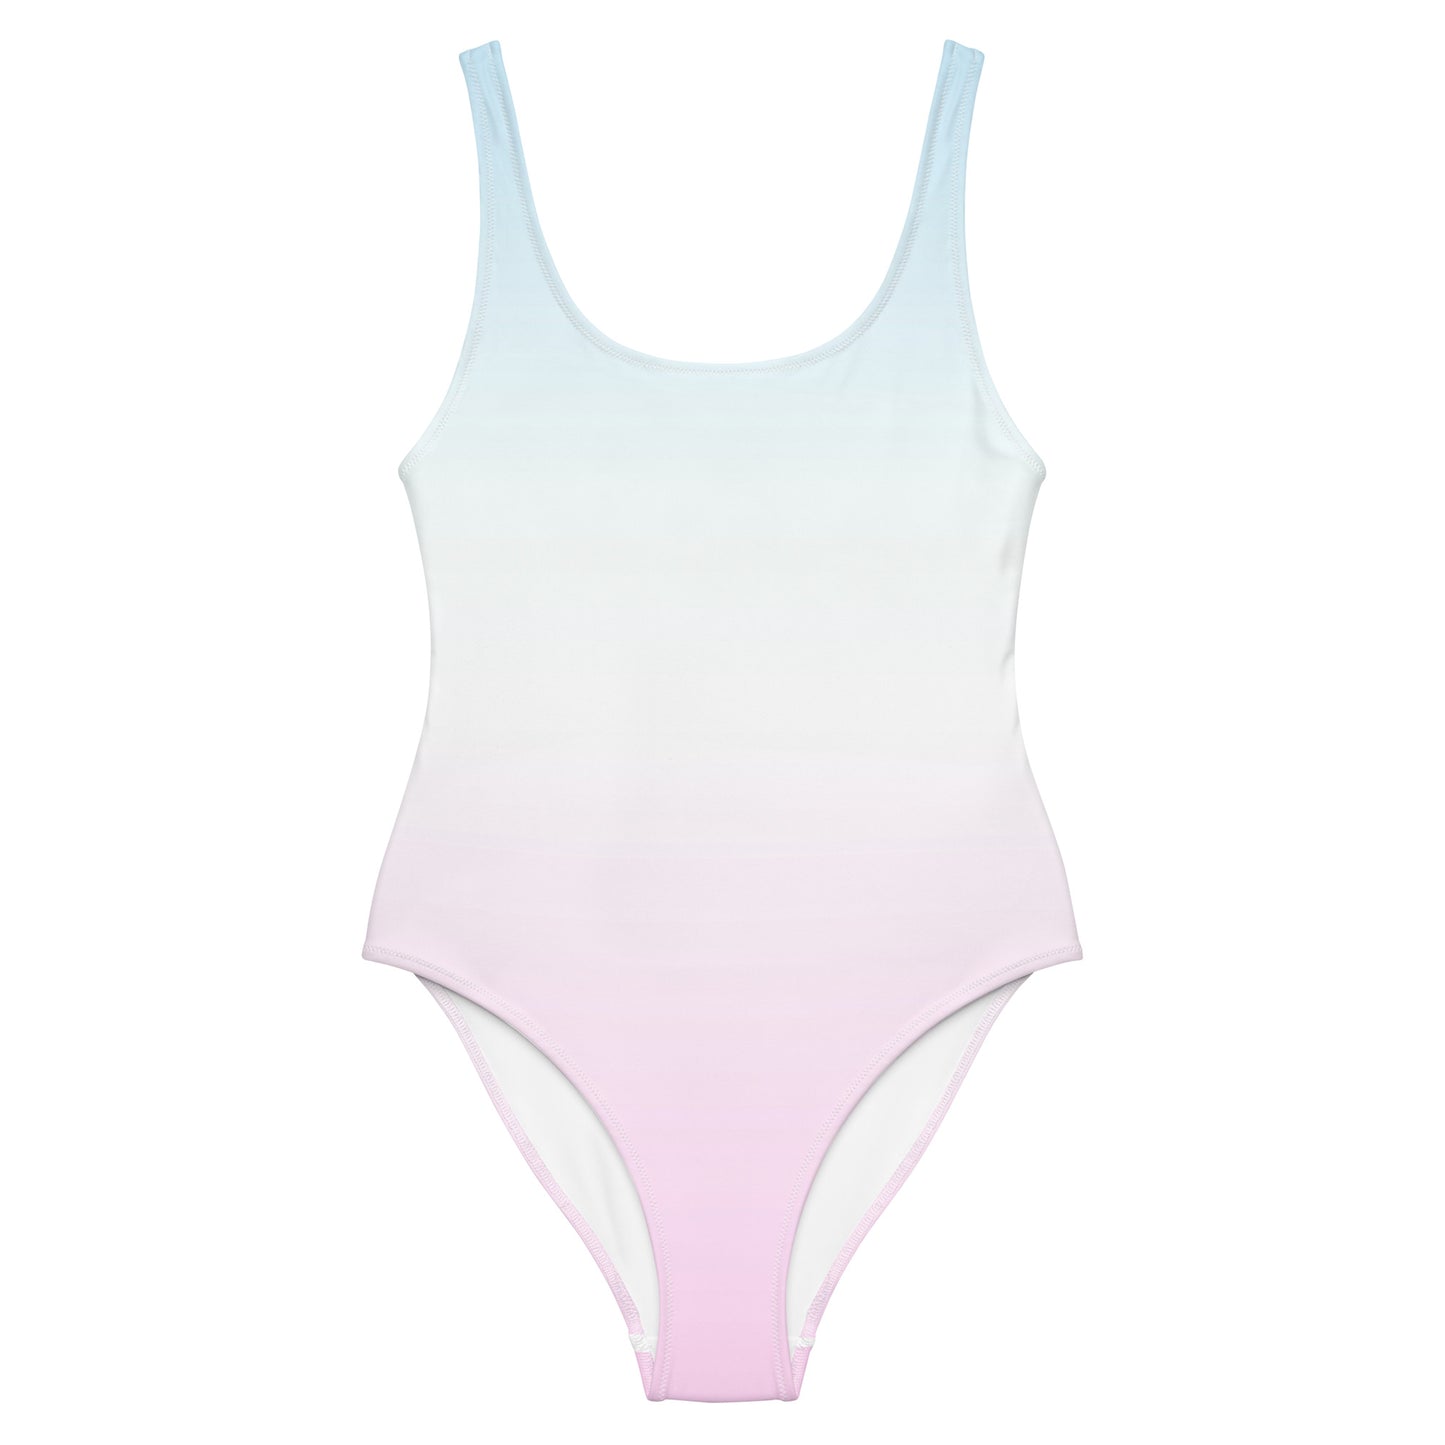 Light Gradient - Sustainably Made One-Piece Swimsuit